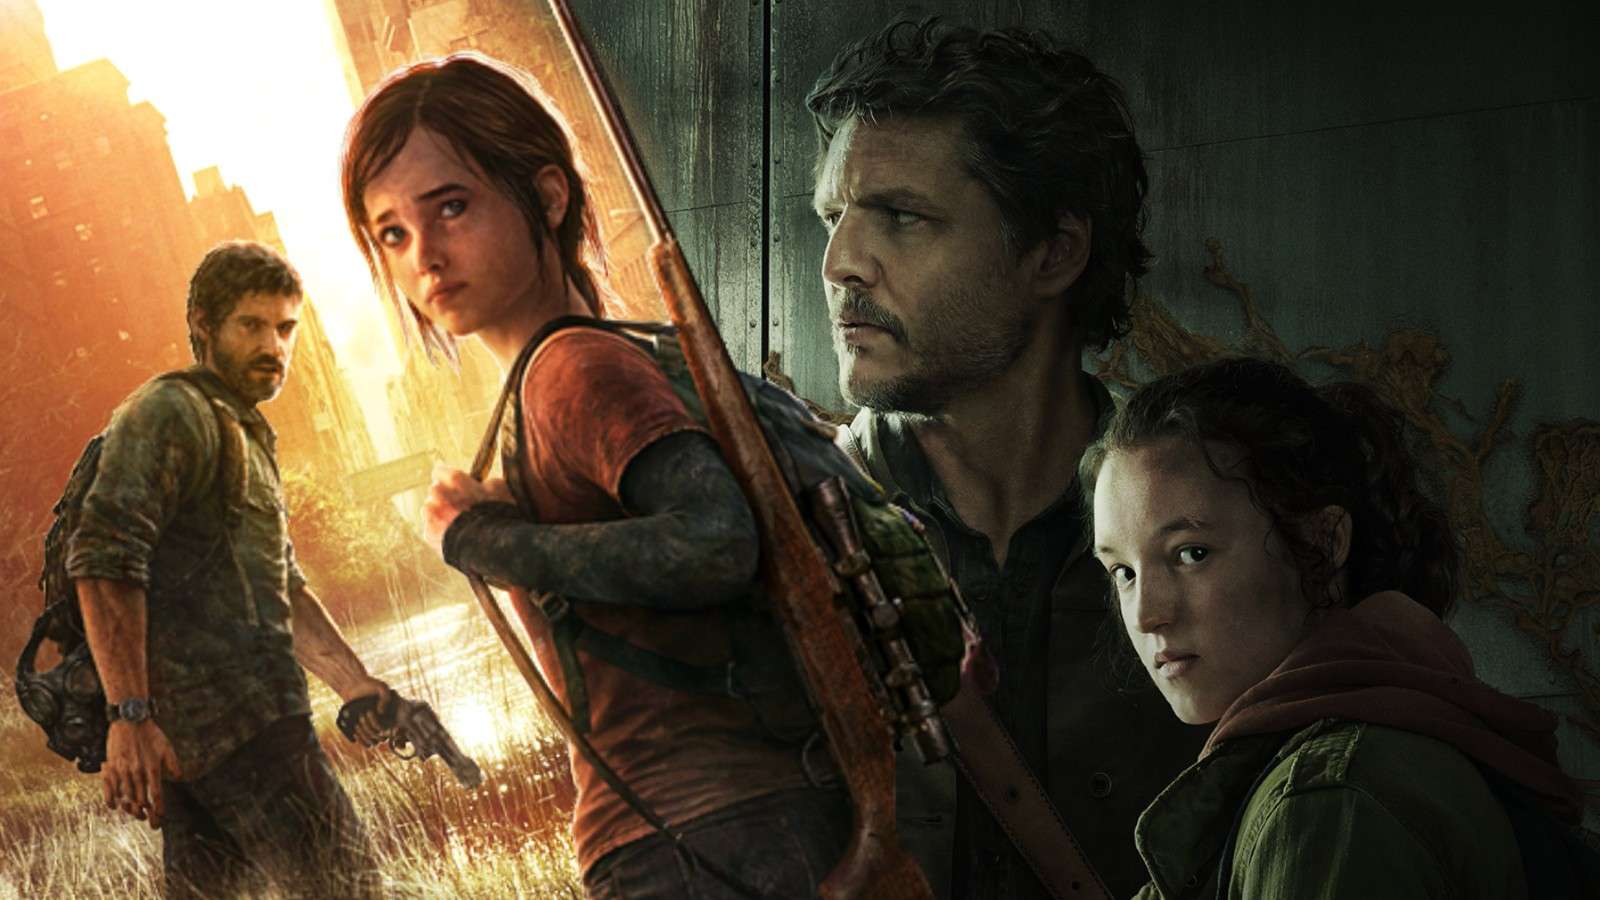 The characters of The Last of Us game and HBO series